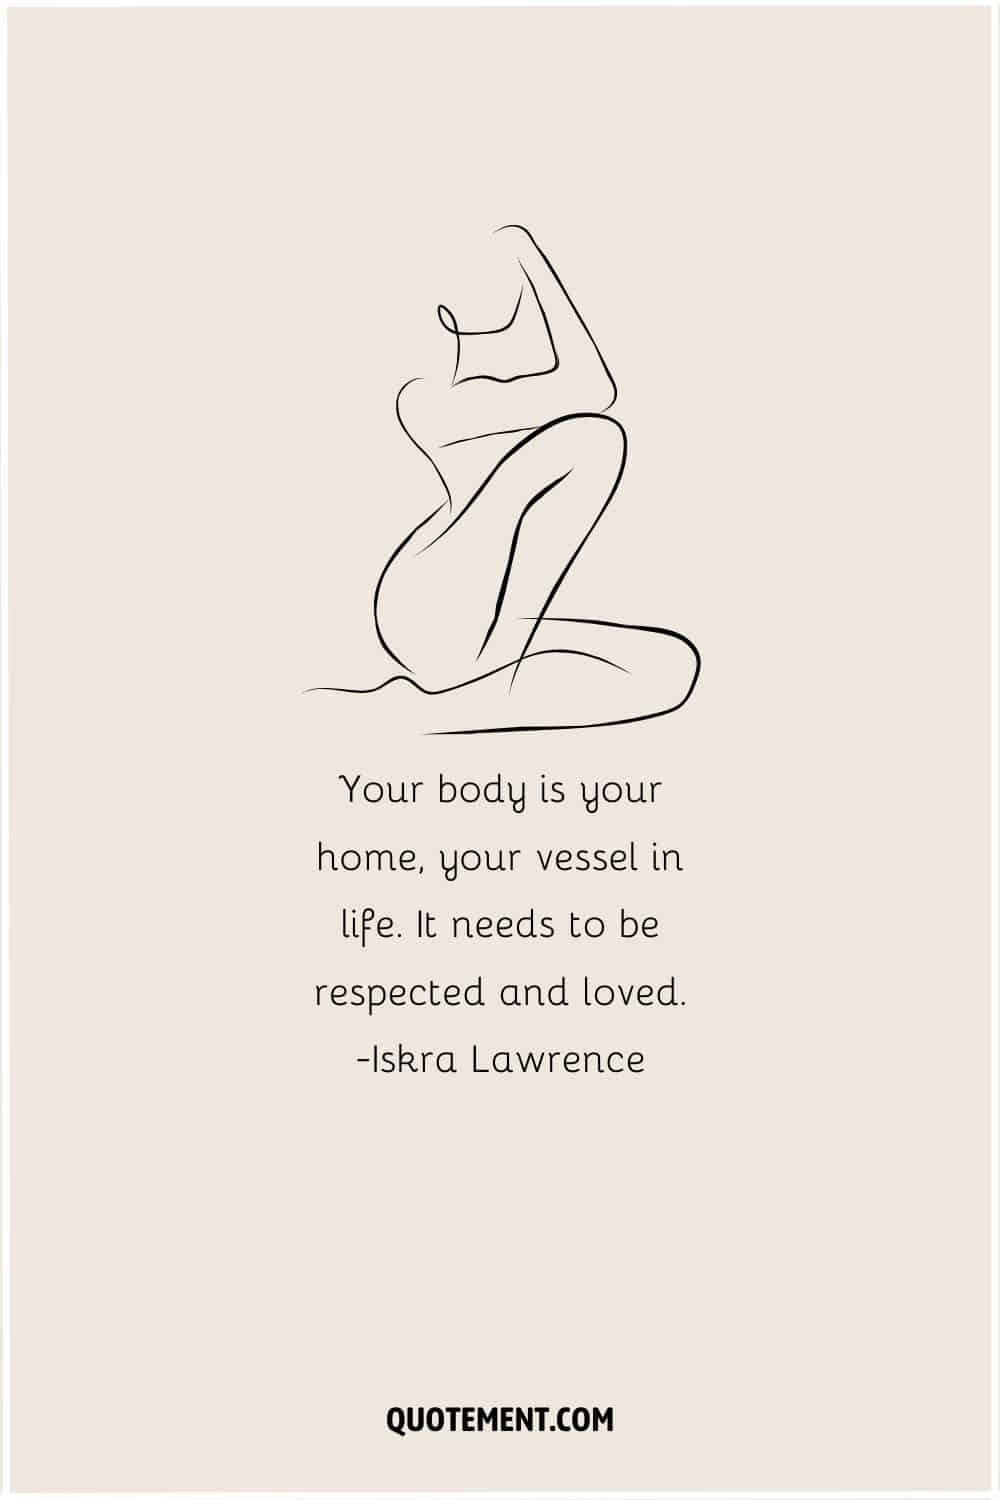 Your body is your home, your vessel in life. It needs to be respected and loved